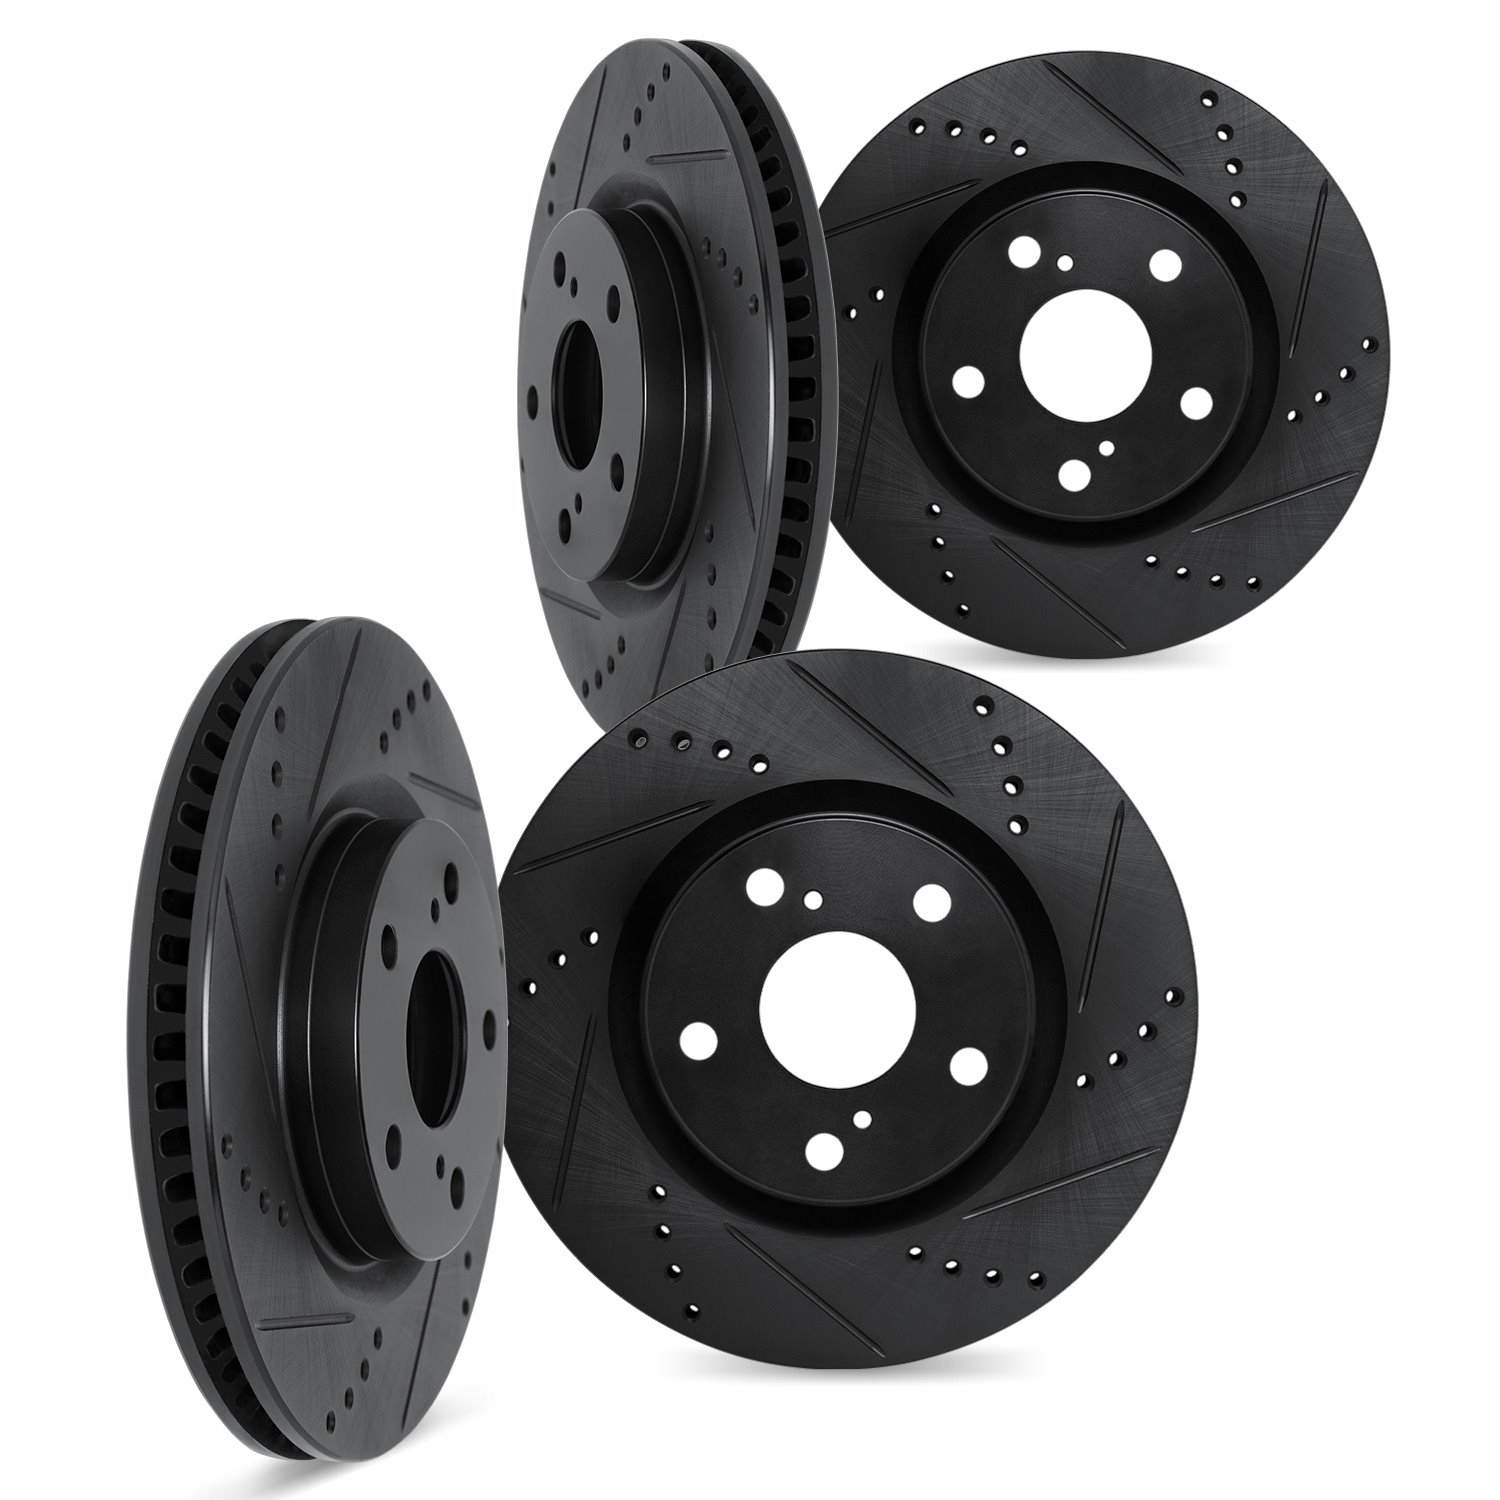 8004-67010 Drilled/Slotted Brake Rotors [Black], Fits Select Infiniti/Nissan, Position: Front and Rear